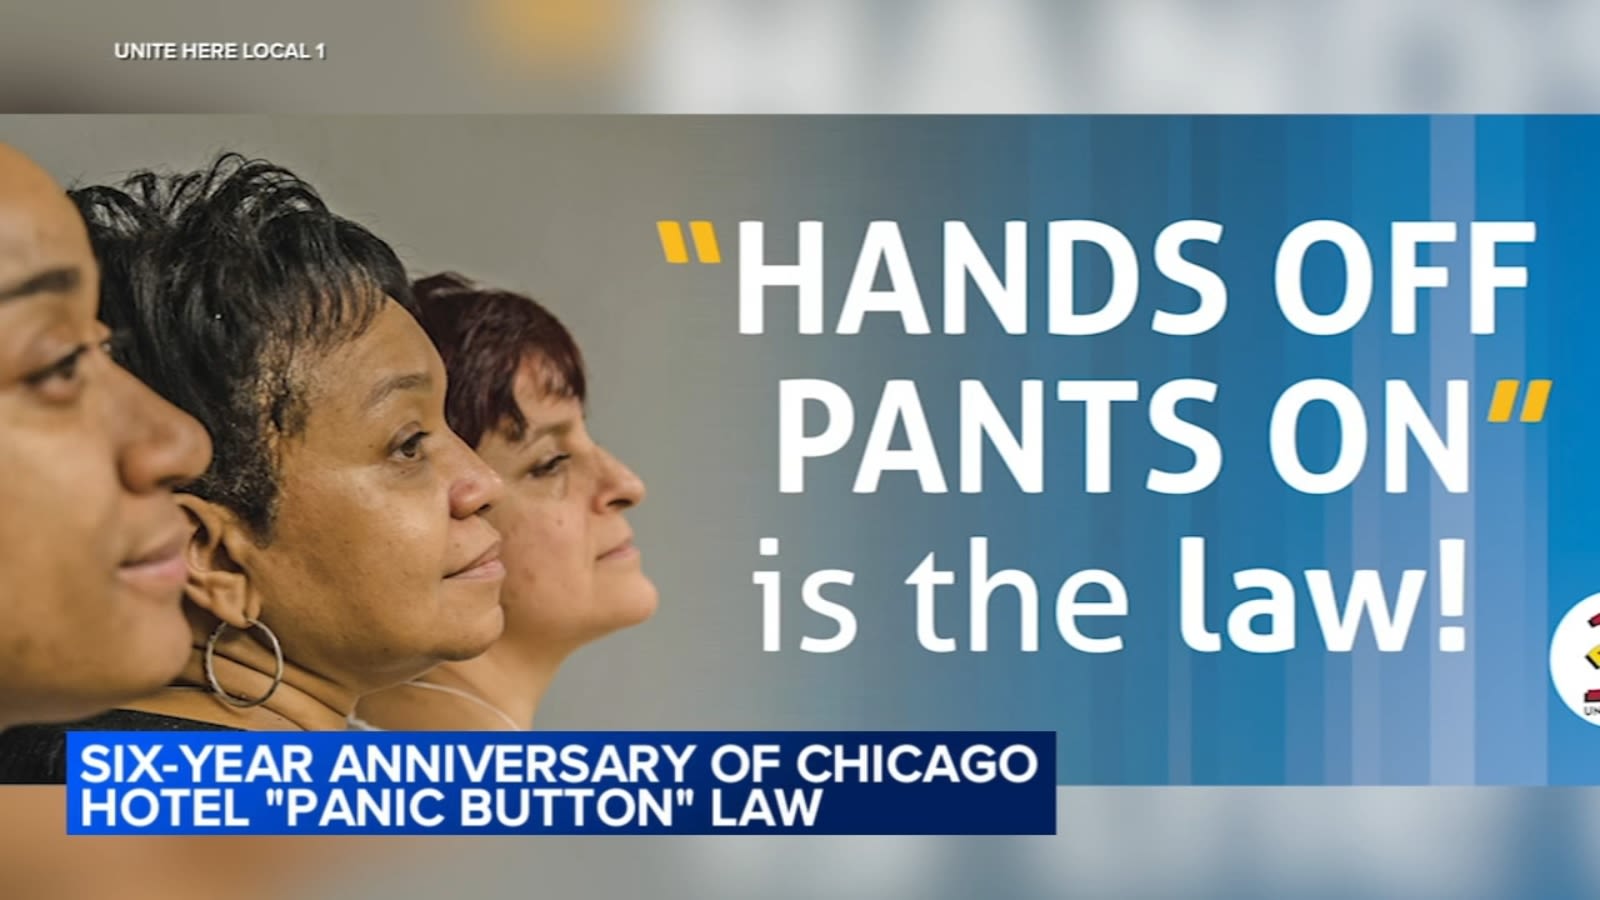 Hotel panic button law approaches 6th year of protecting workers from sexual harassment, assault